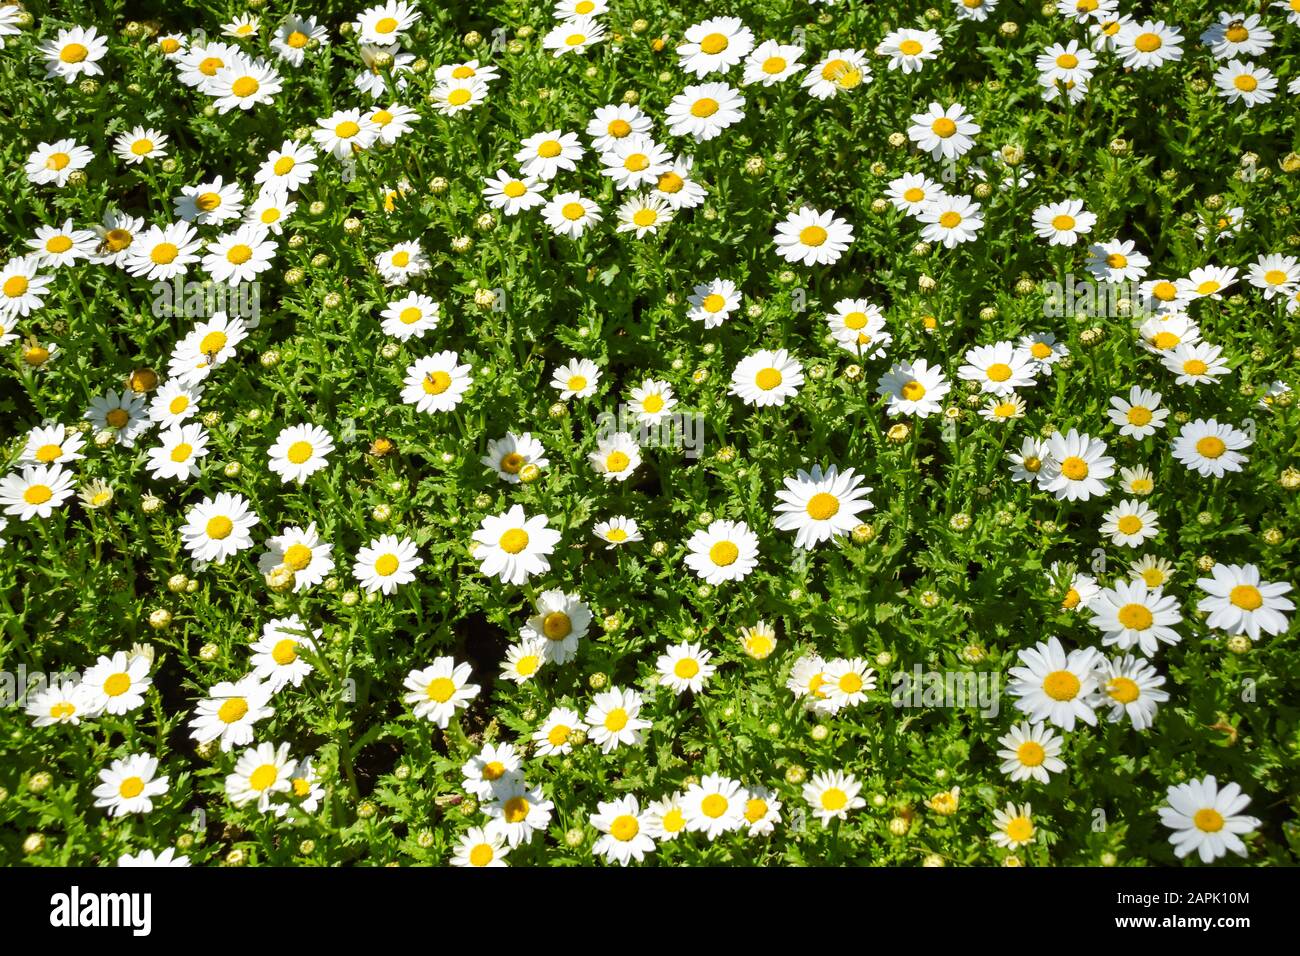 A group of white daisy flowers. Stock Photo